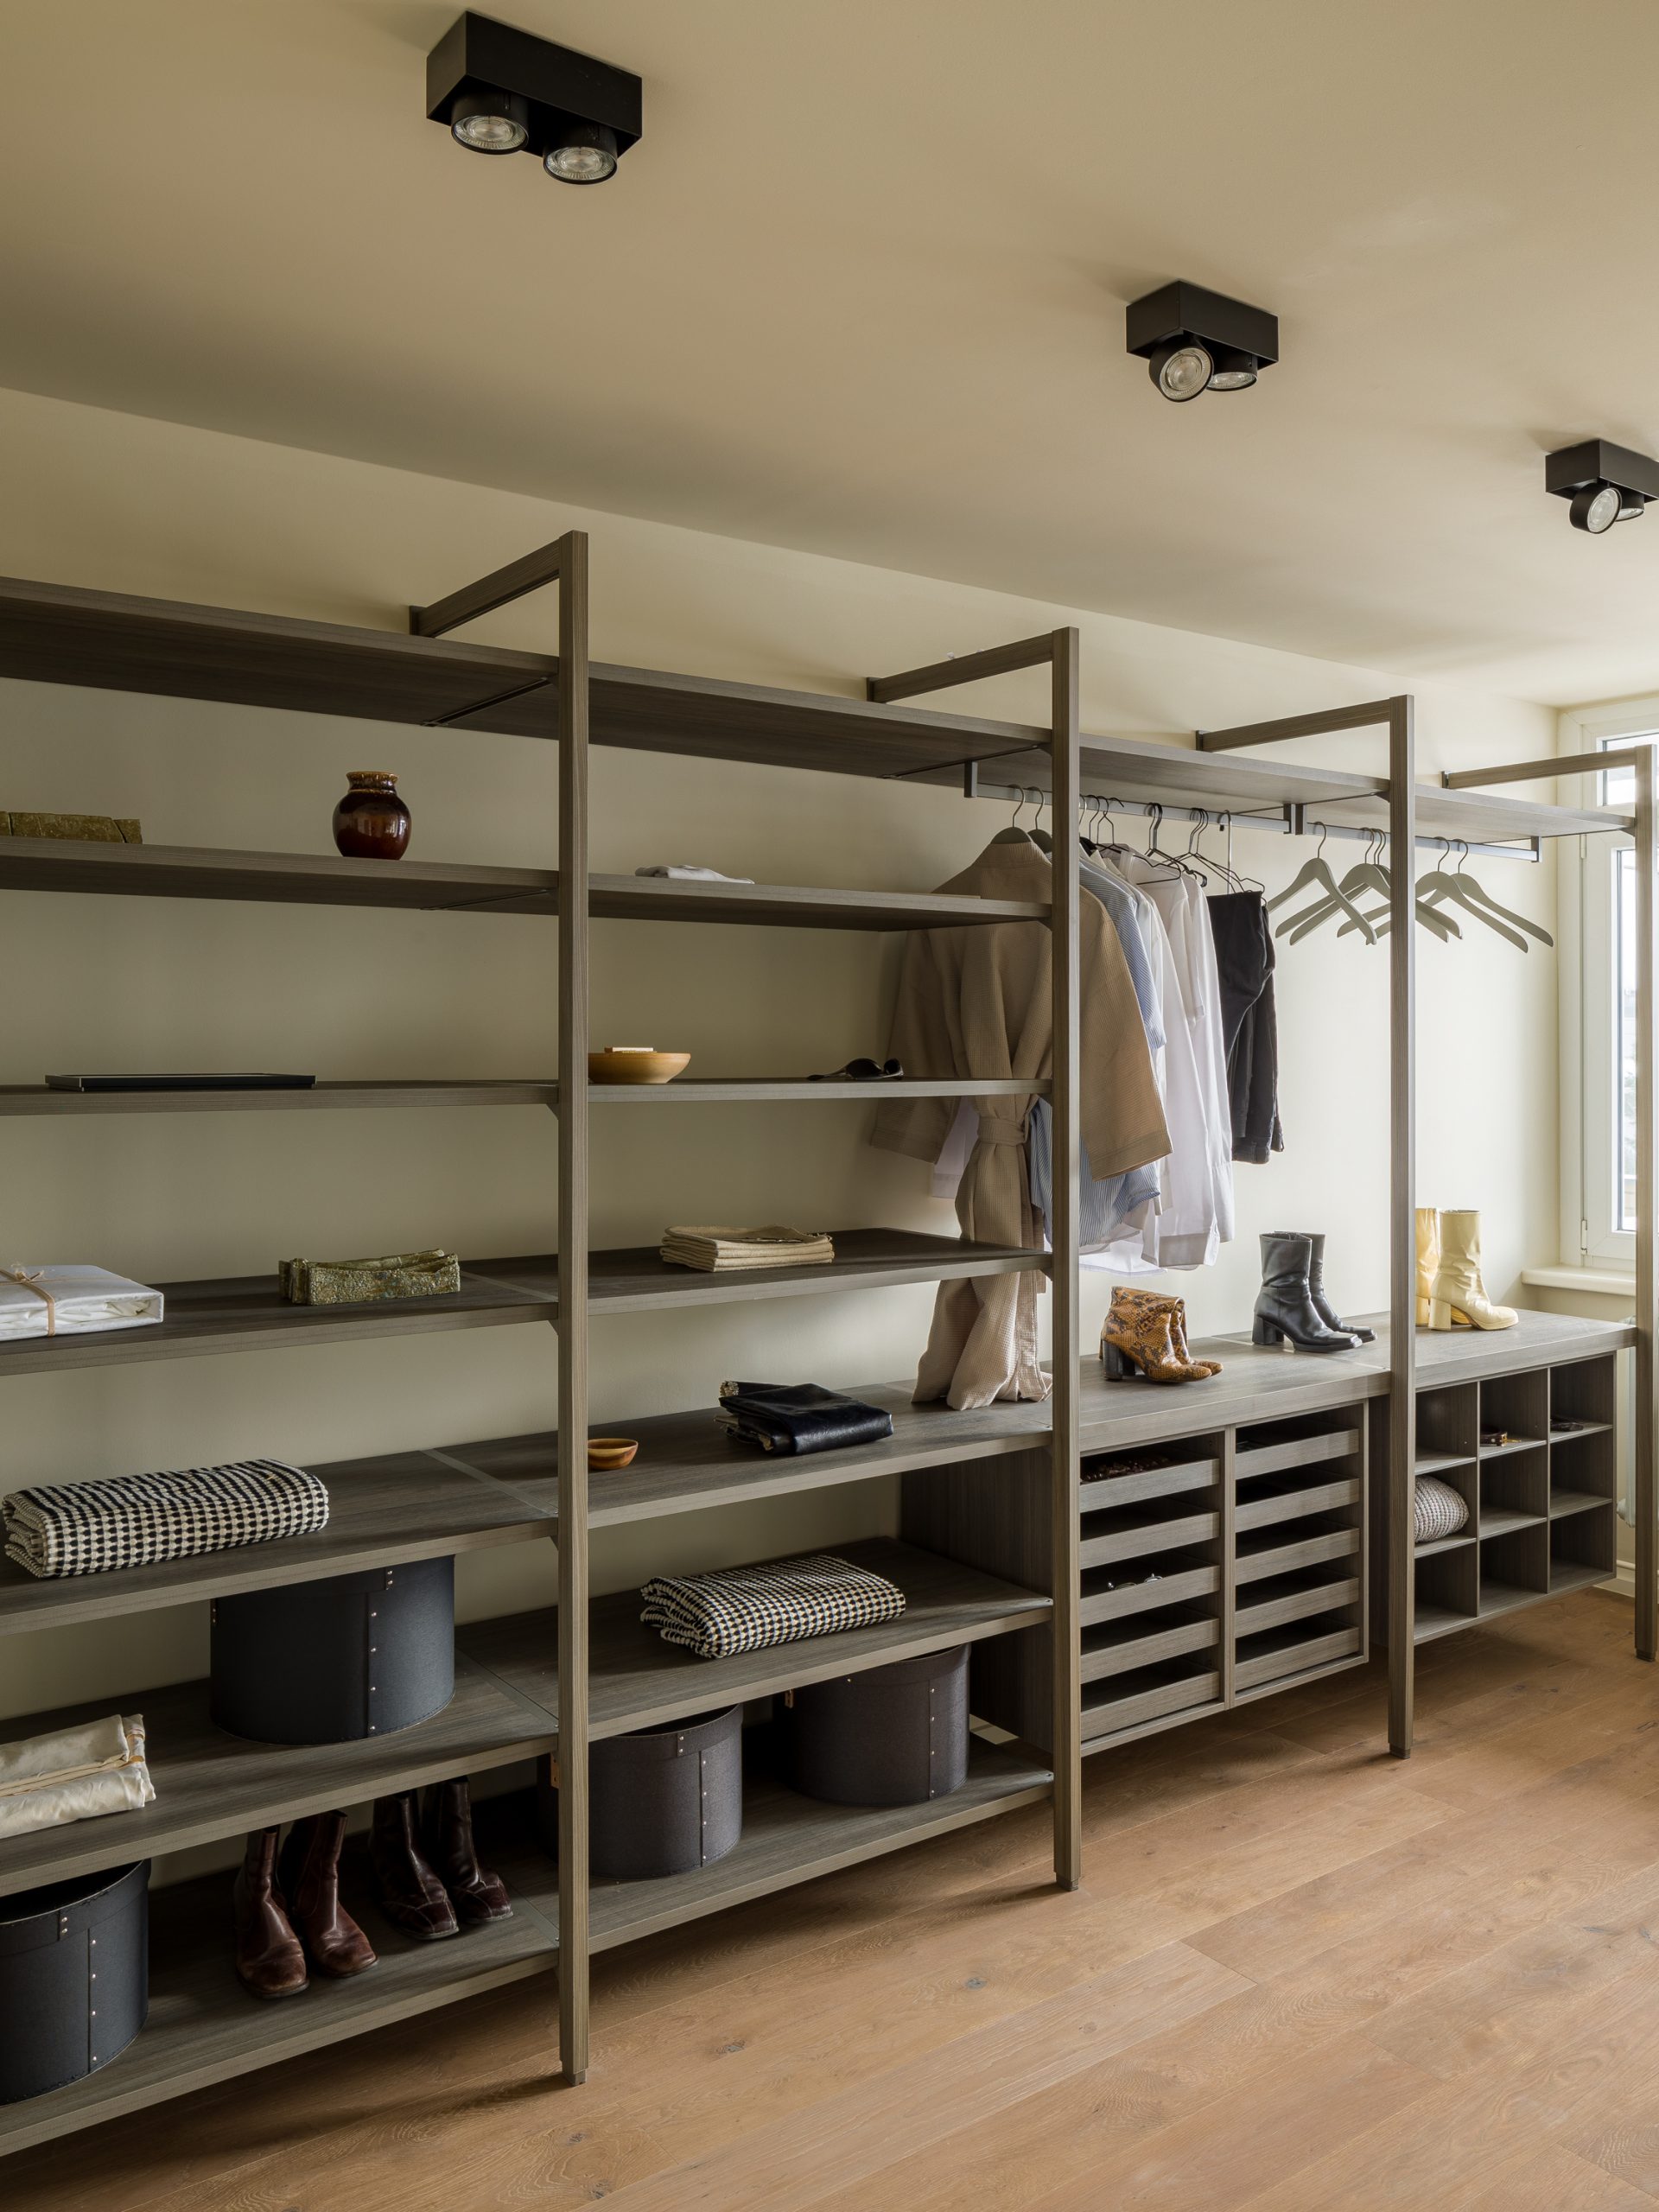 Walk-in-closet 22 at Model Apartment by Pounroir